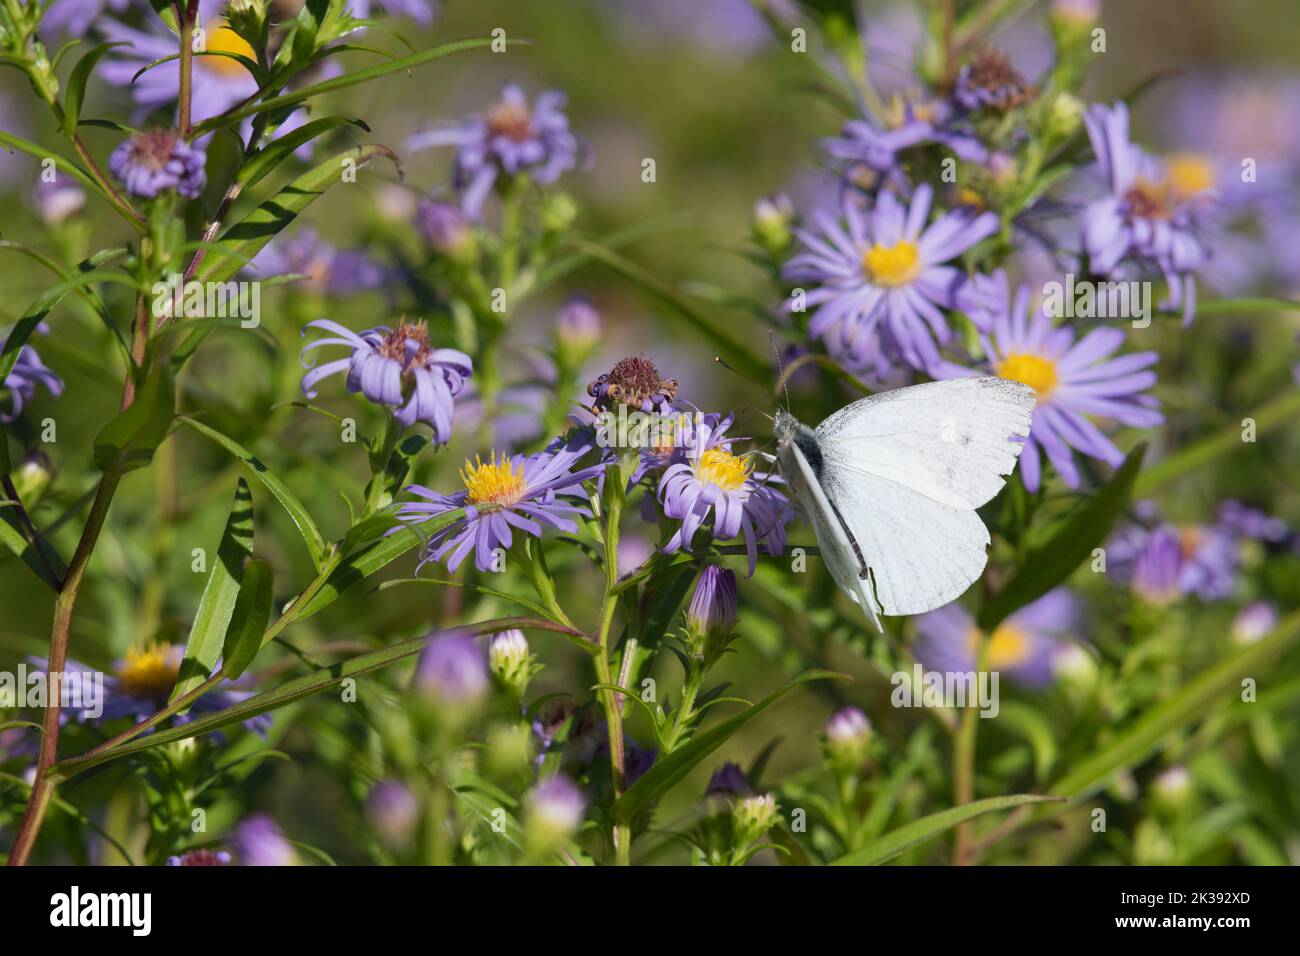 A Small White Butterfly (Pieris Rapae) Foraging Amongst Michaelmas Daisy Flowers (Symphyotrichum Novi-Belgii) in Late Summer / Early Autumn Stock Photo